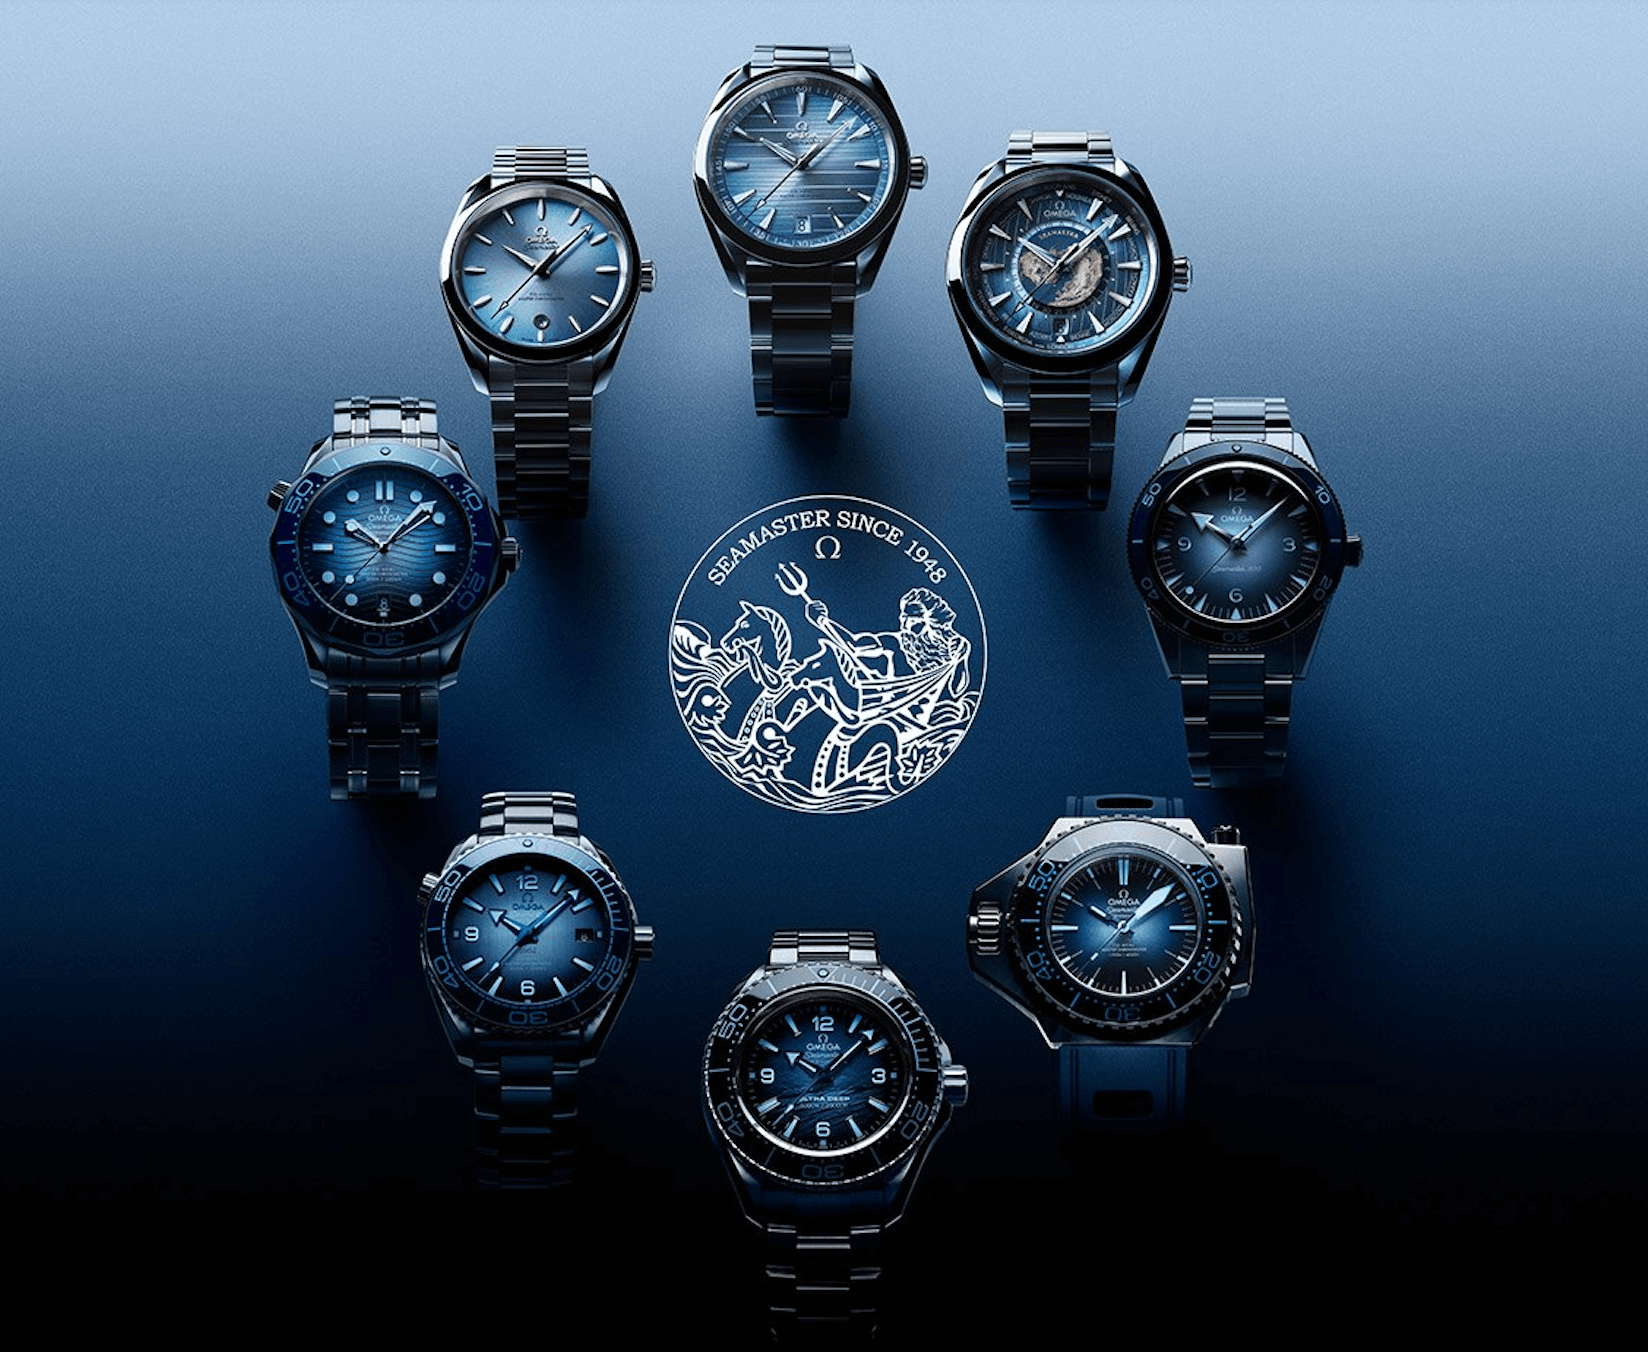 To celebrate its oceangoing icon, OMEGA has produced a collection of watches with dials in various layers of Summer Blue. A striking tone reminiscent of a perfect day on a boundless sea.